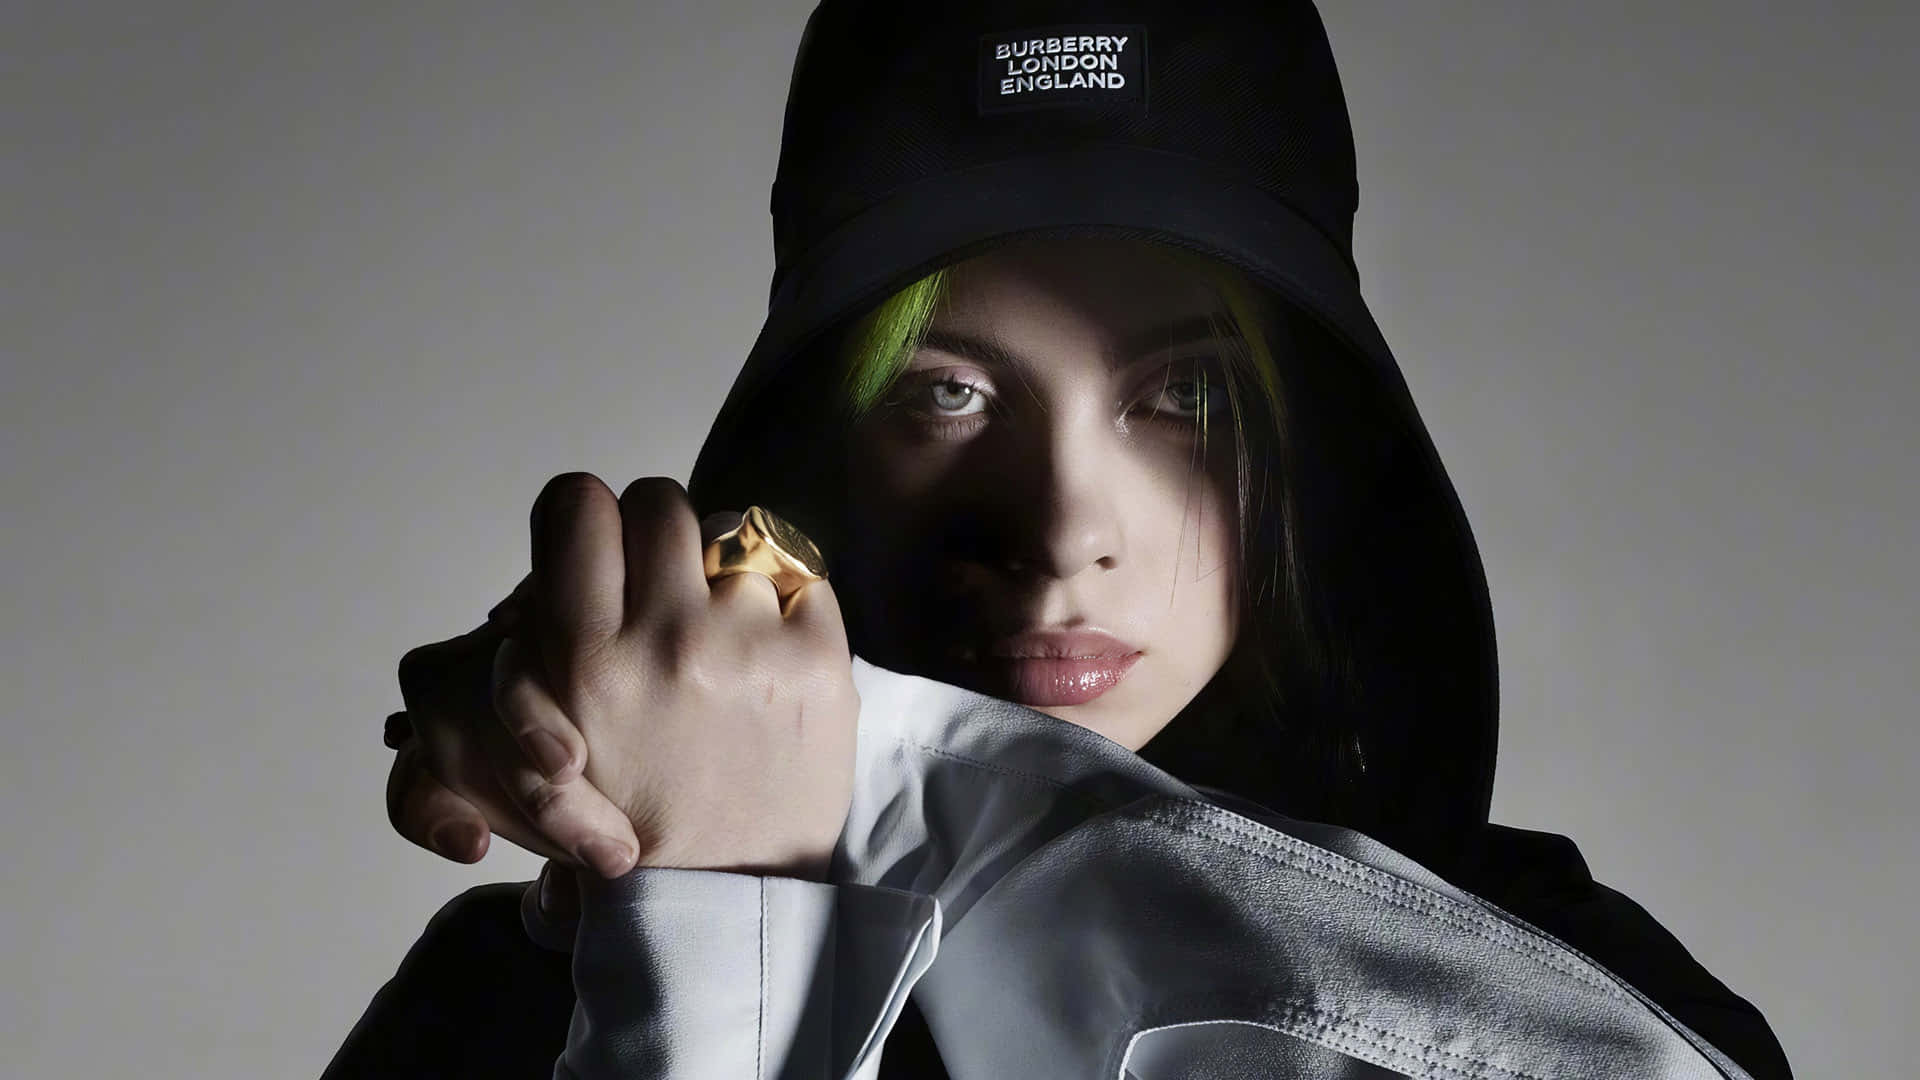 Girl Power! Billie Eilish stands with her laptop showing her influence and success. Wallpaper